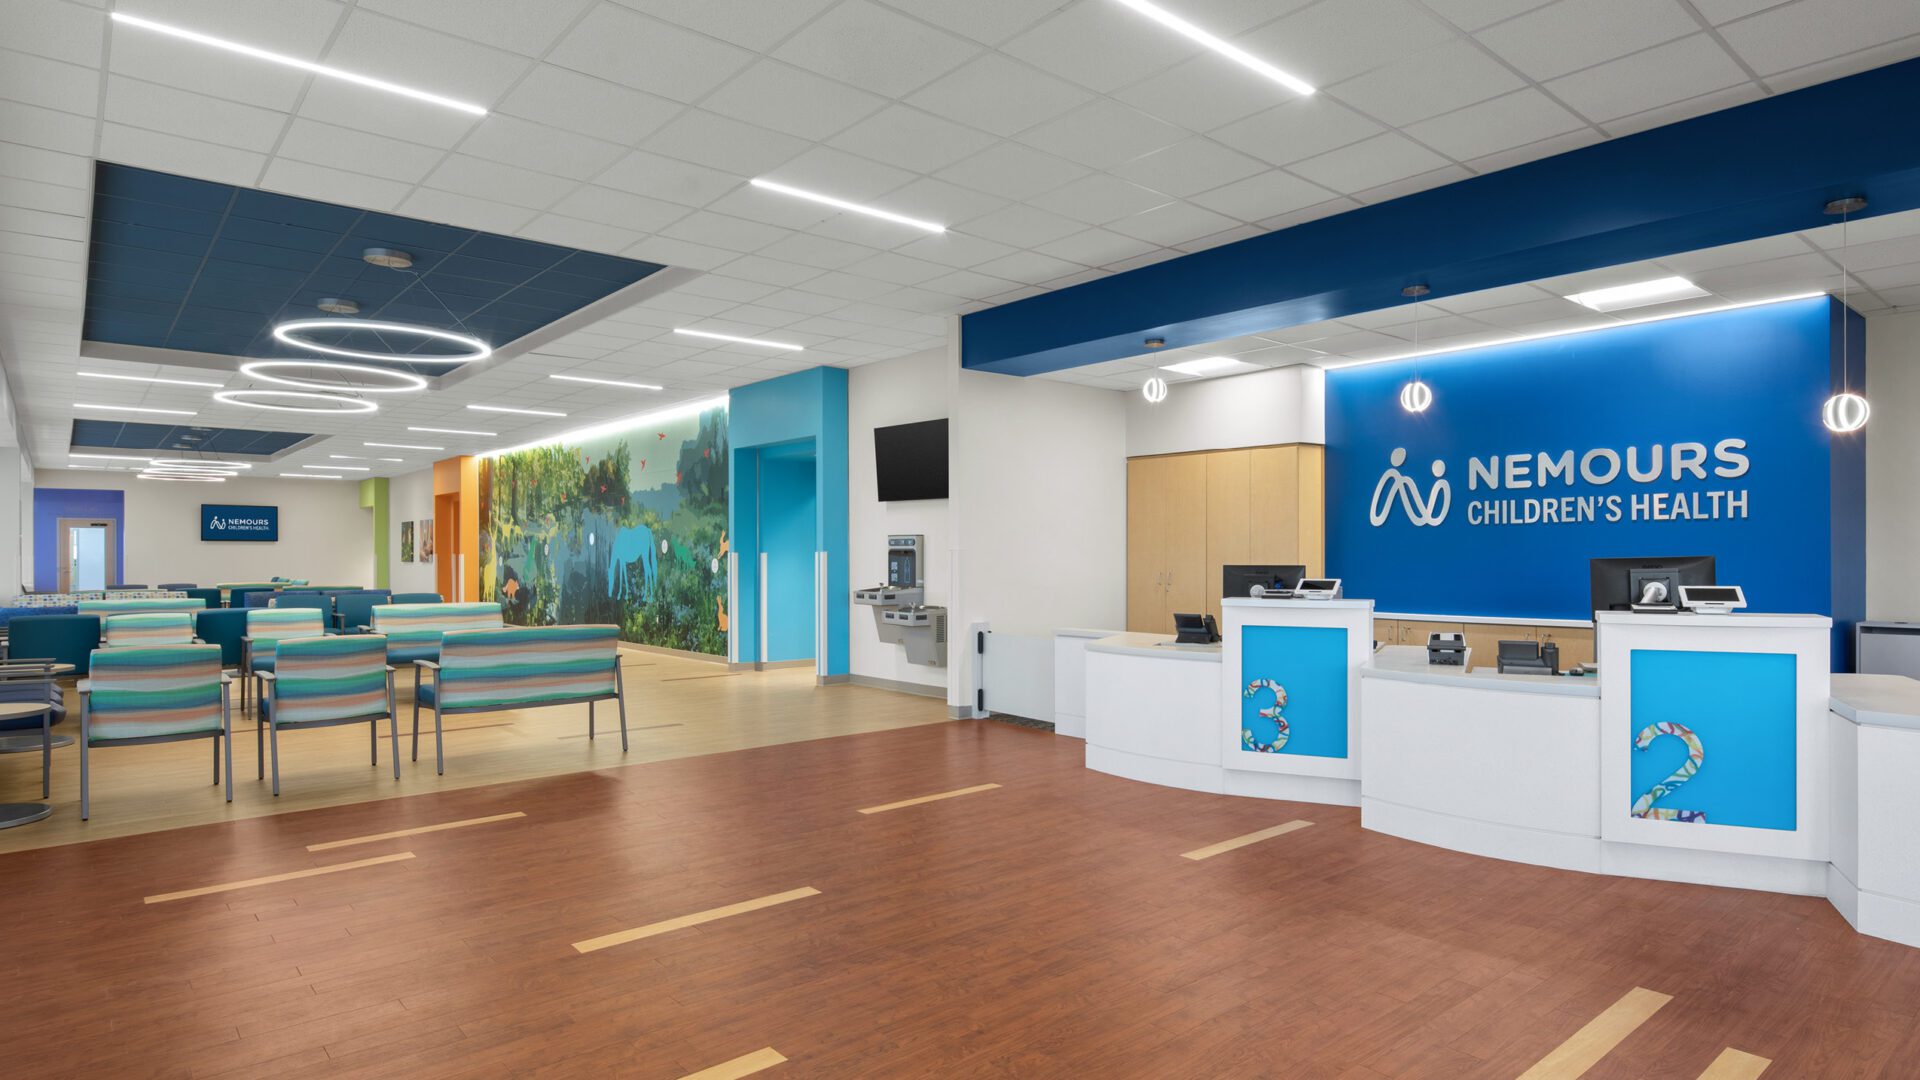 Nemours Children’s Health reception and waiting area